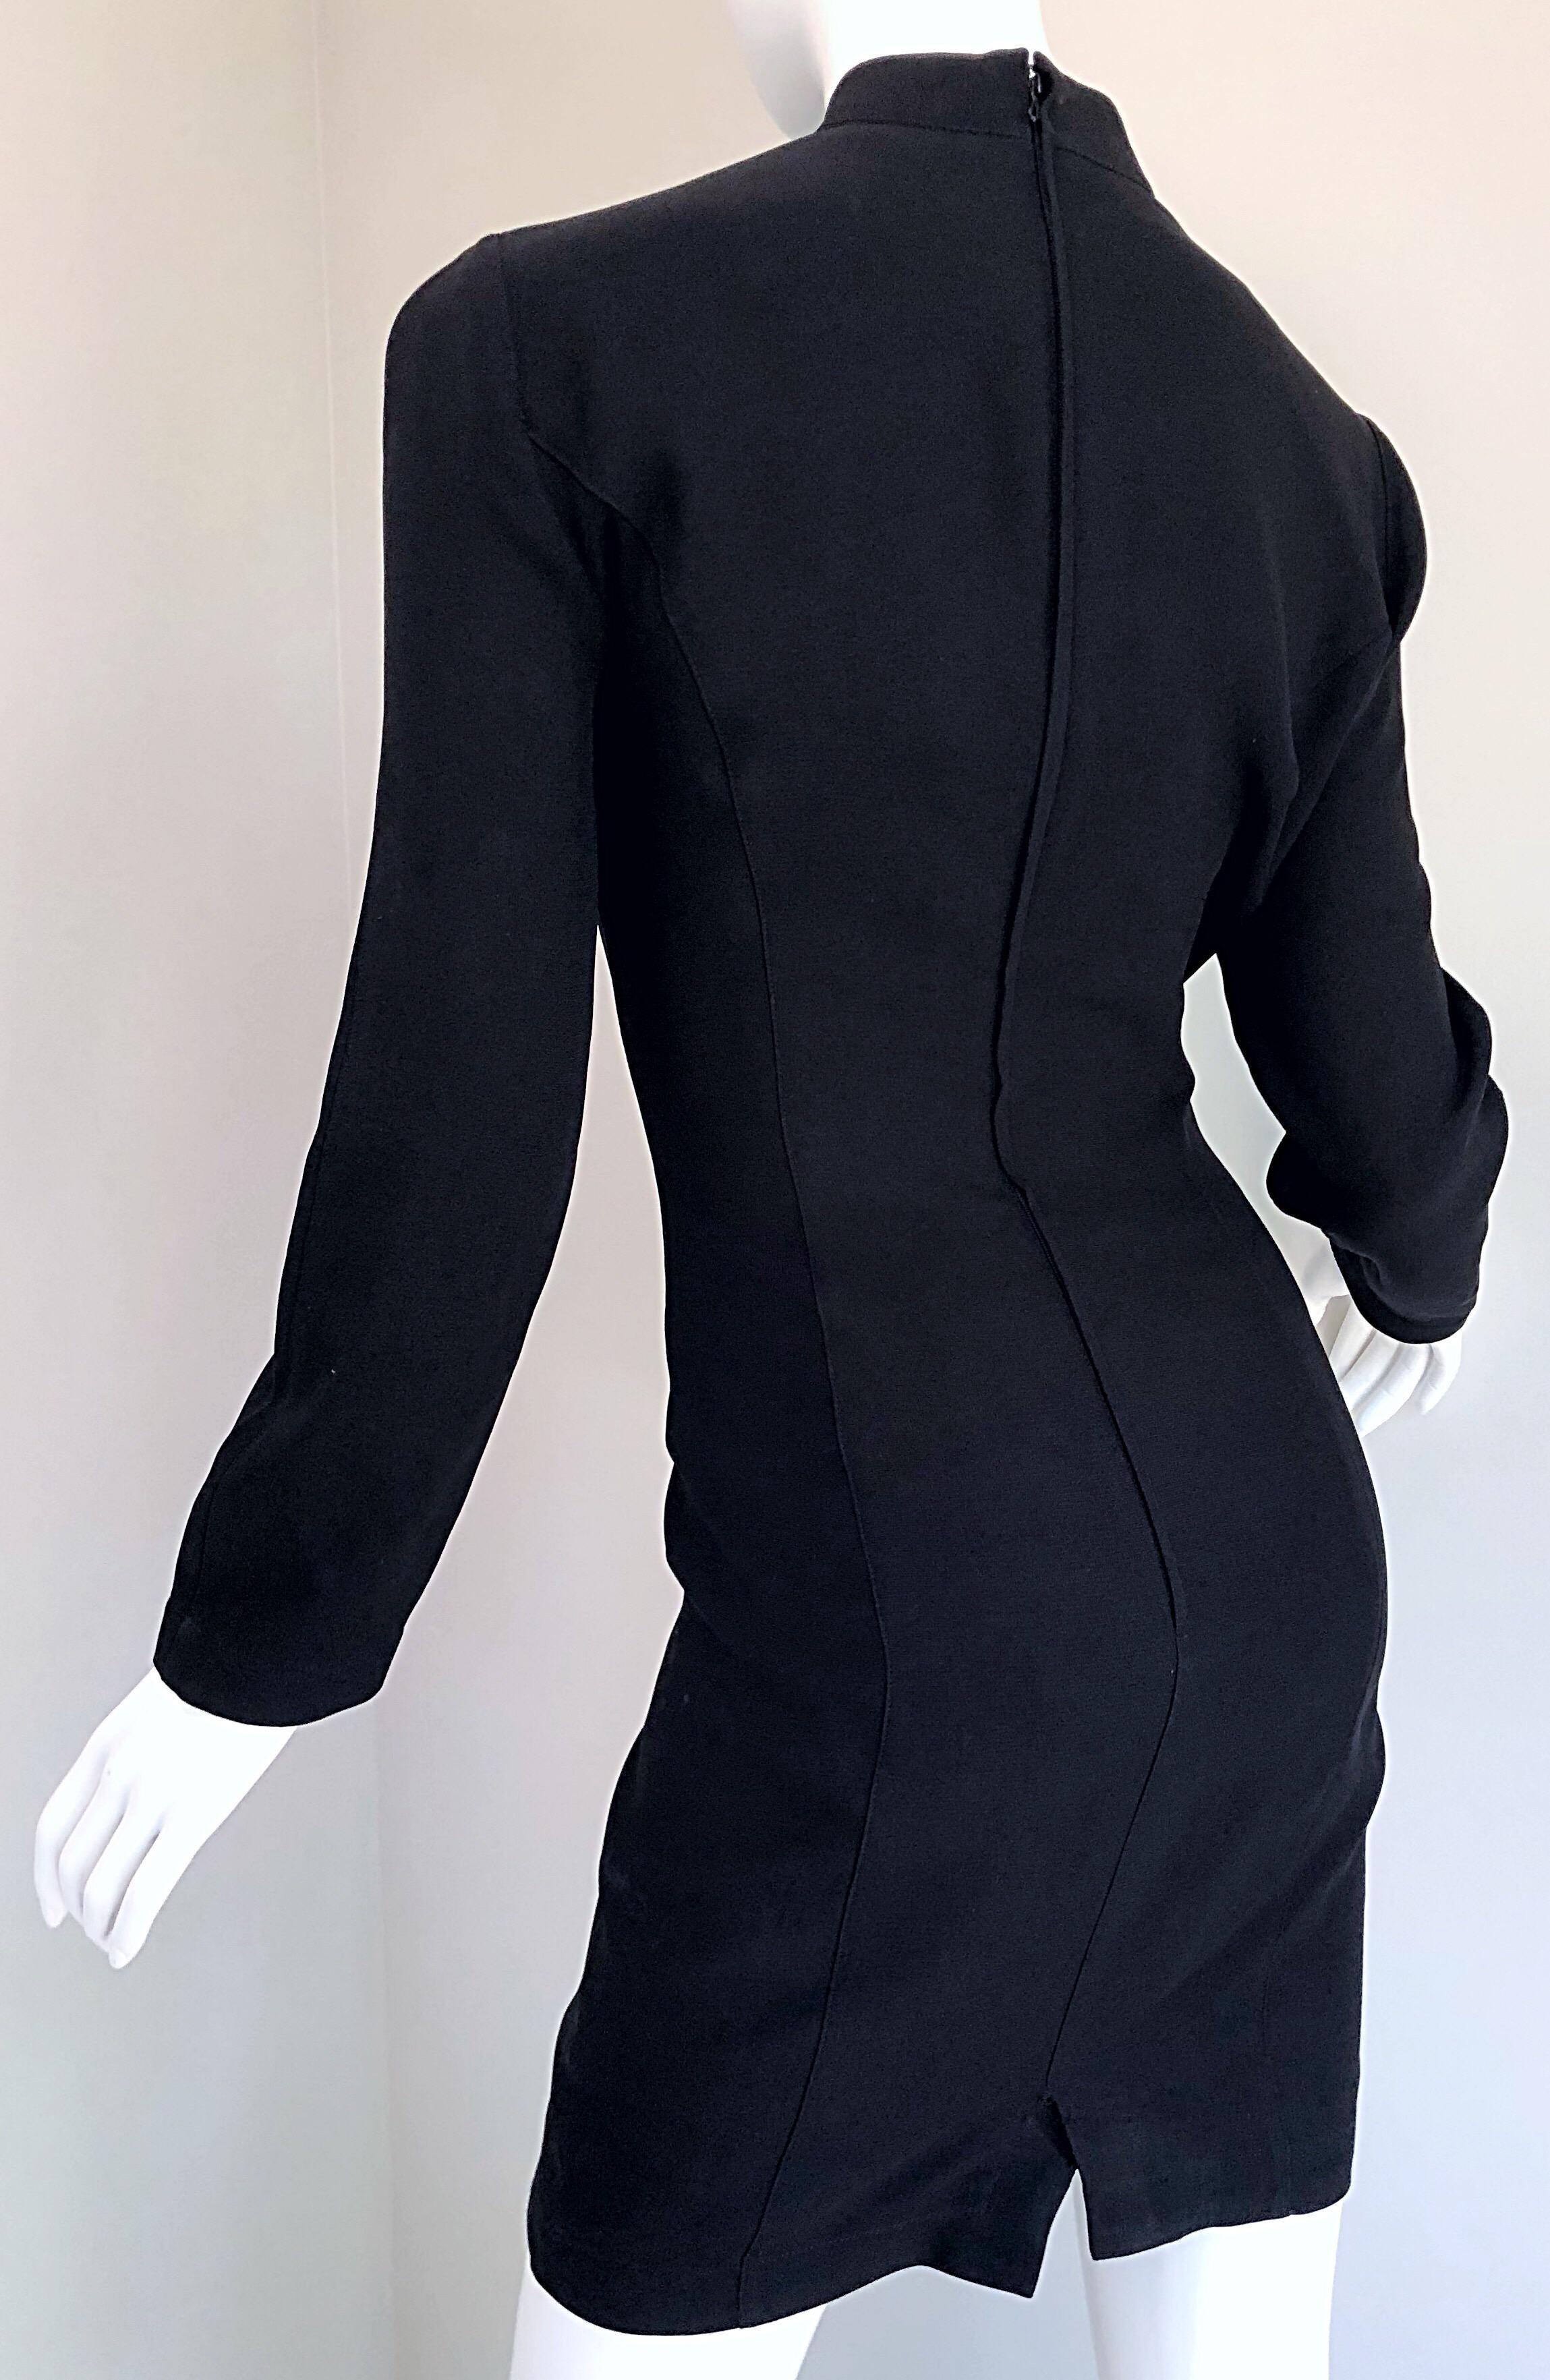 Iconic Vintage Thierry Mugler 80s Bondage Inspired Cut - Out Black 1980s Dress For Sale 6